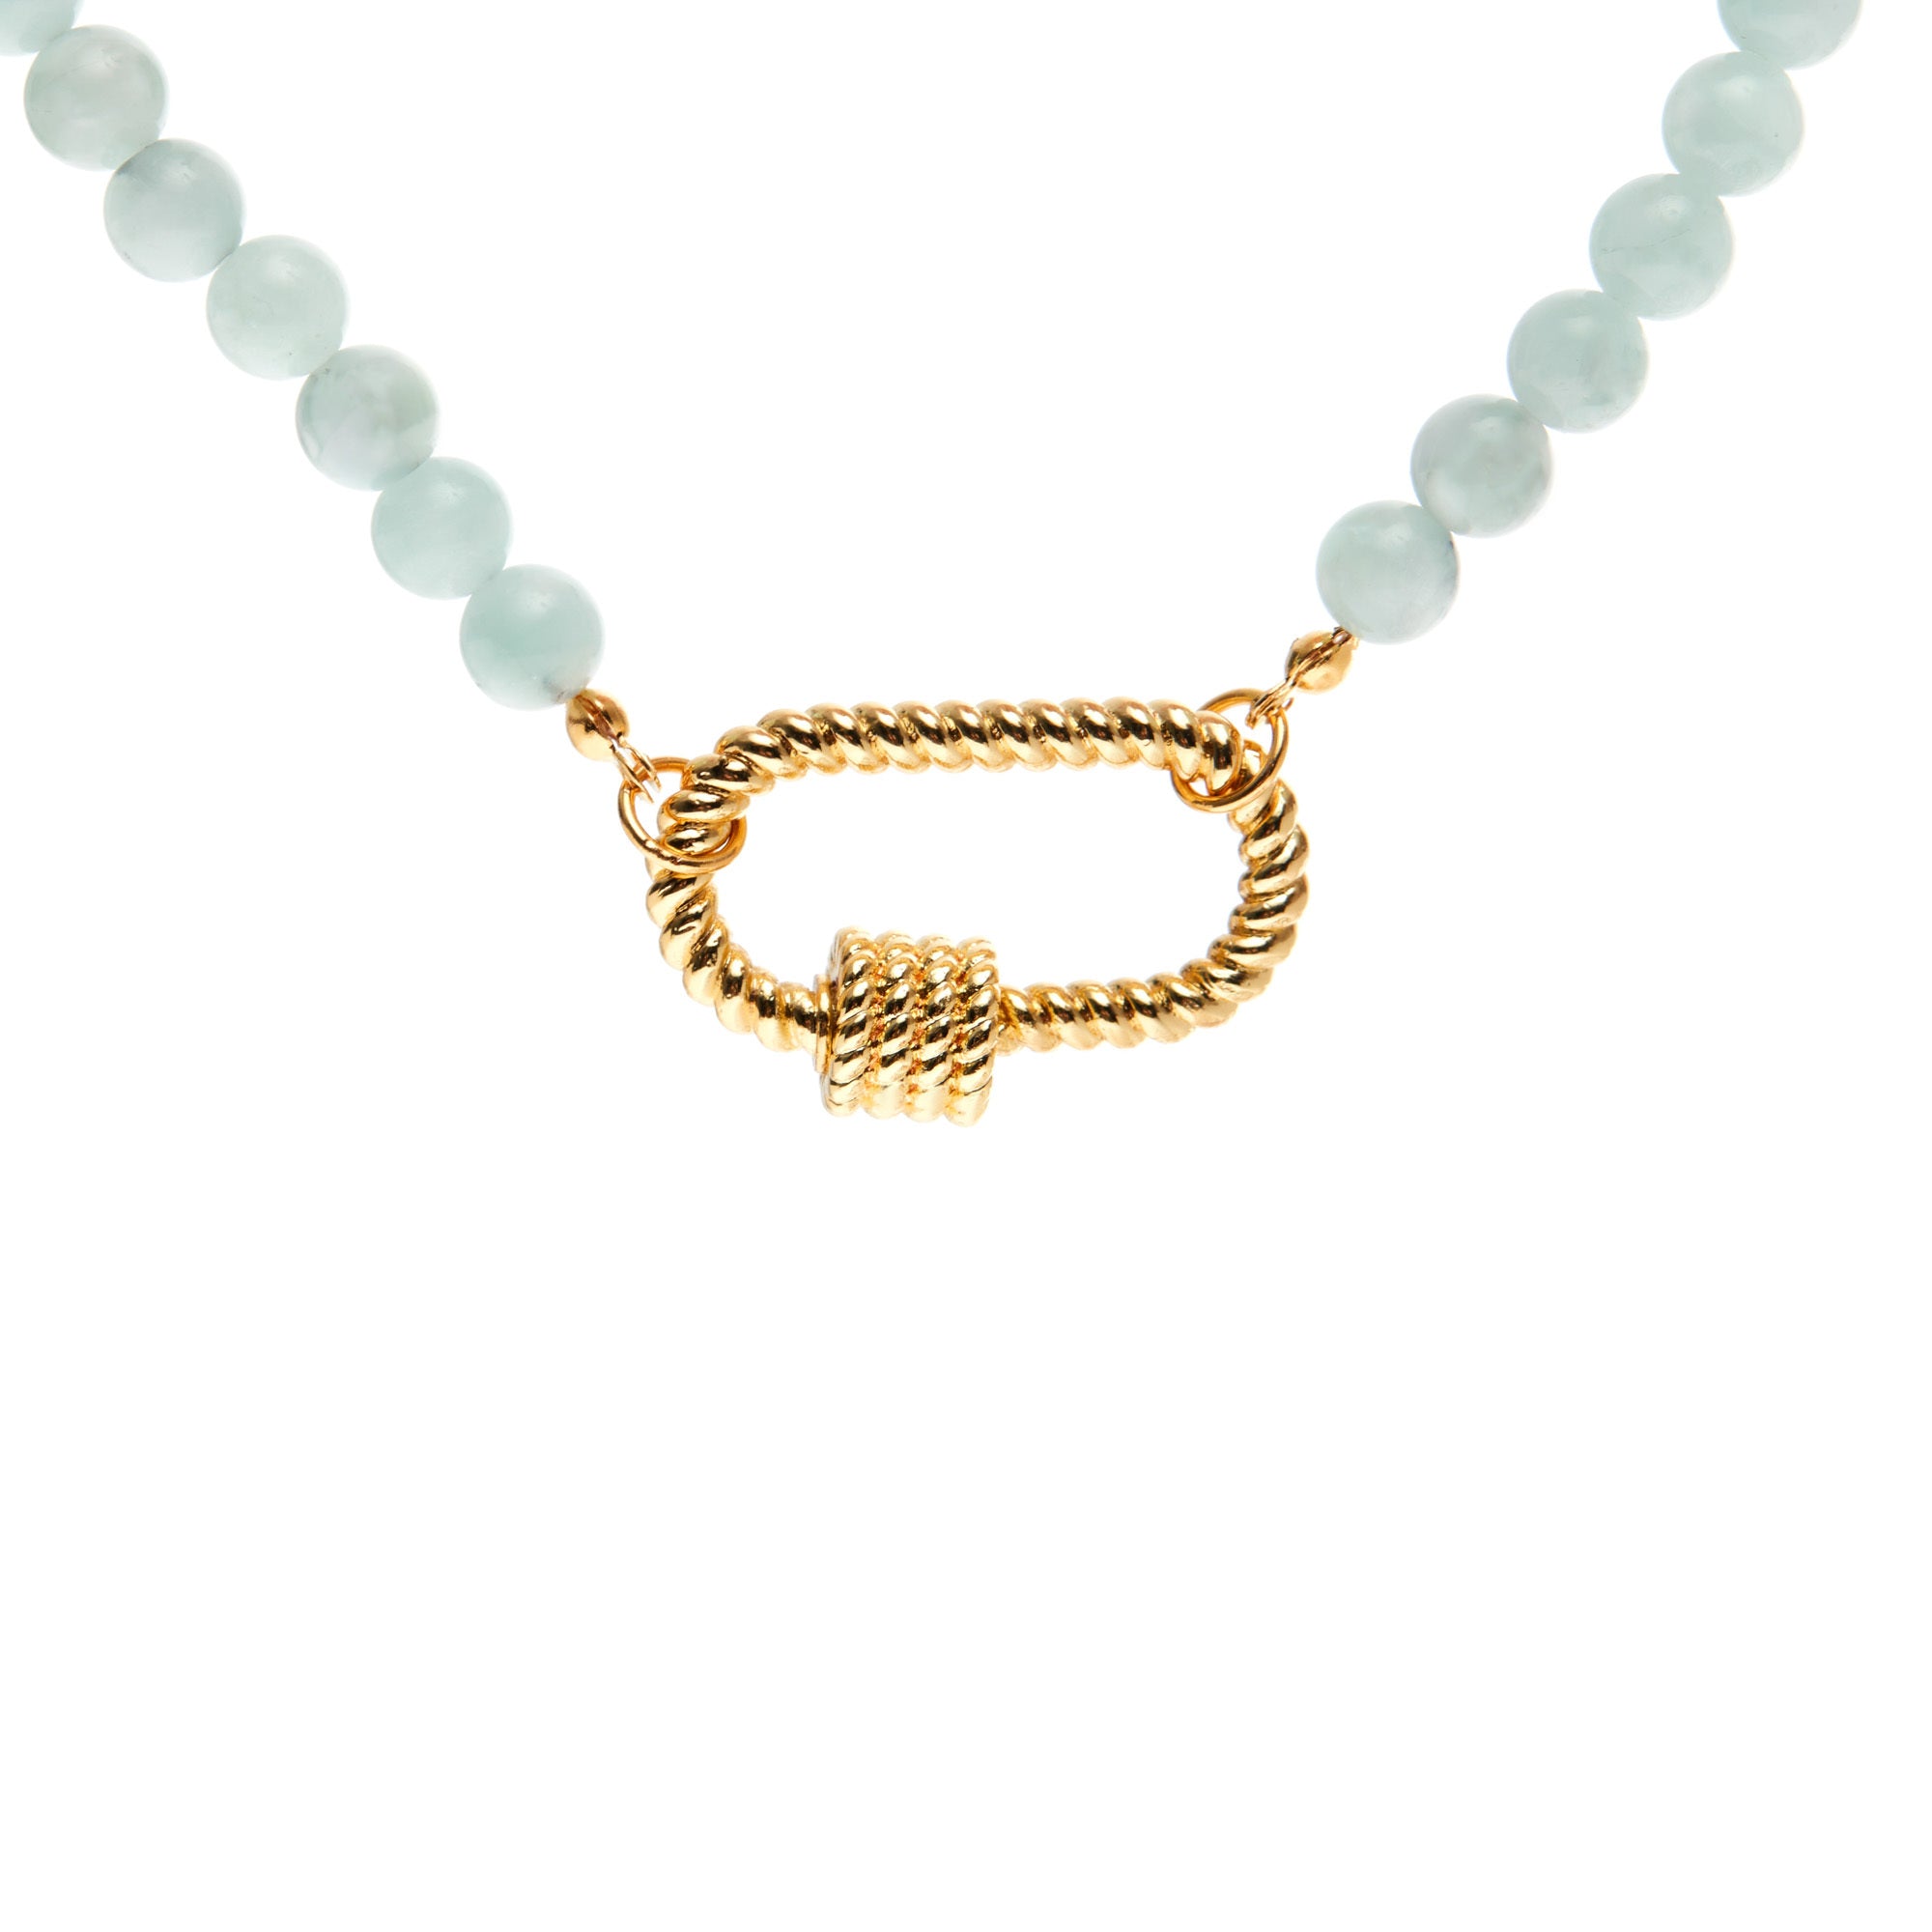 Necklace 'Gold Carabiner' – Anggelos